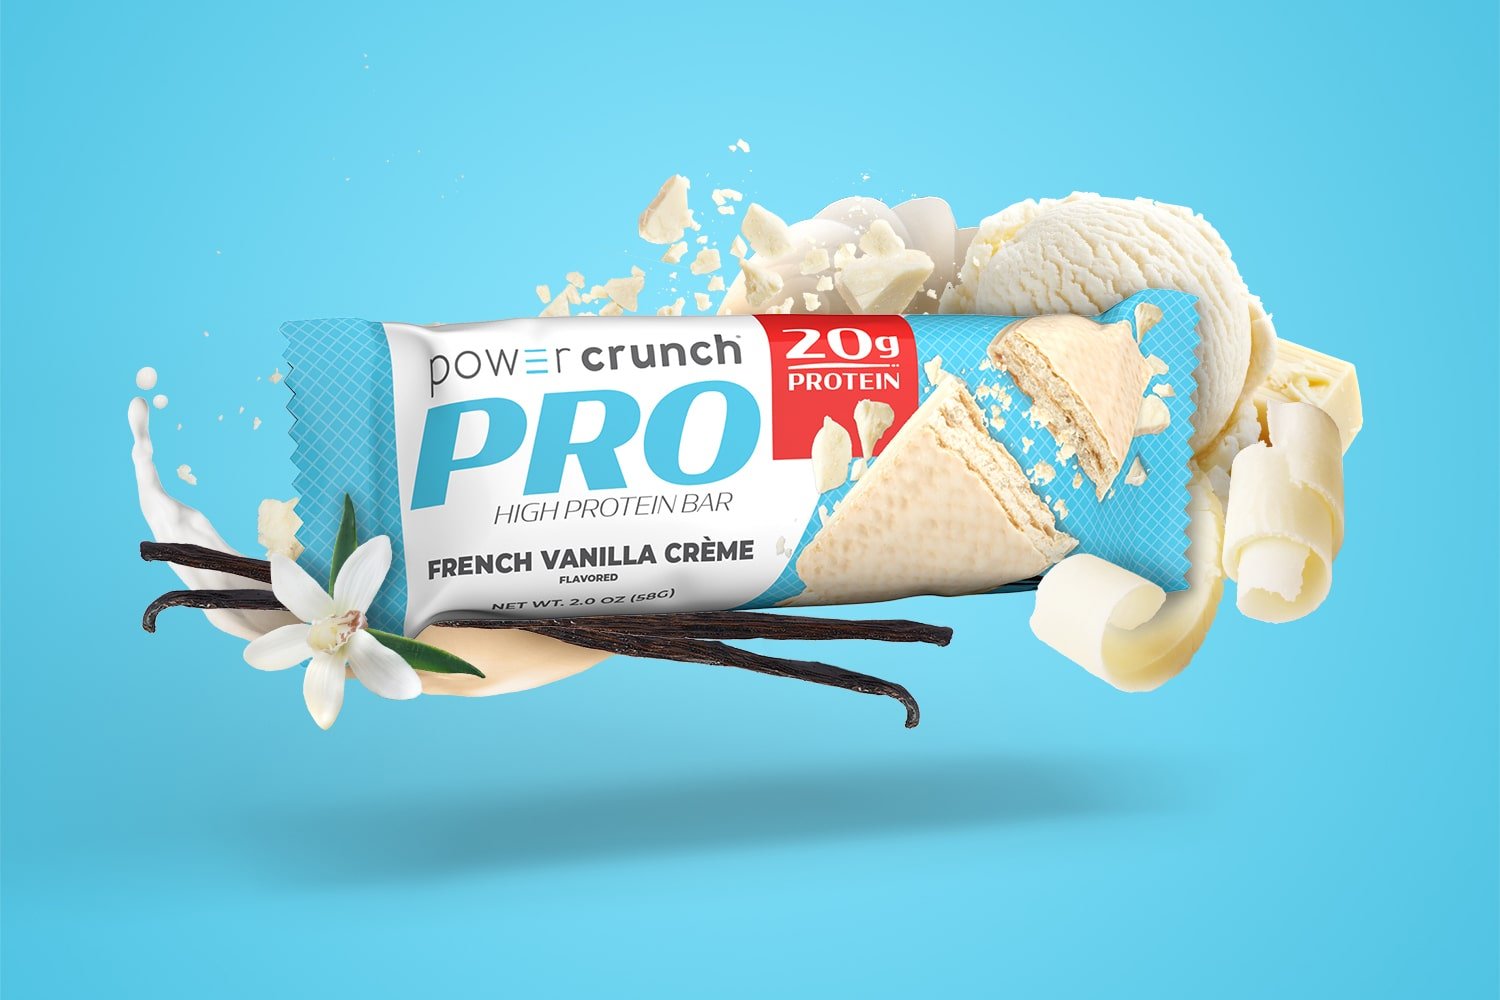 PRO French Vanilla 20g protein bars pictured with French Vanilla flavor explosion